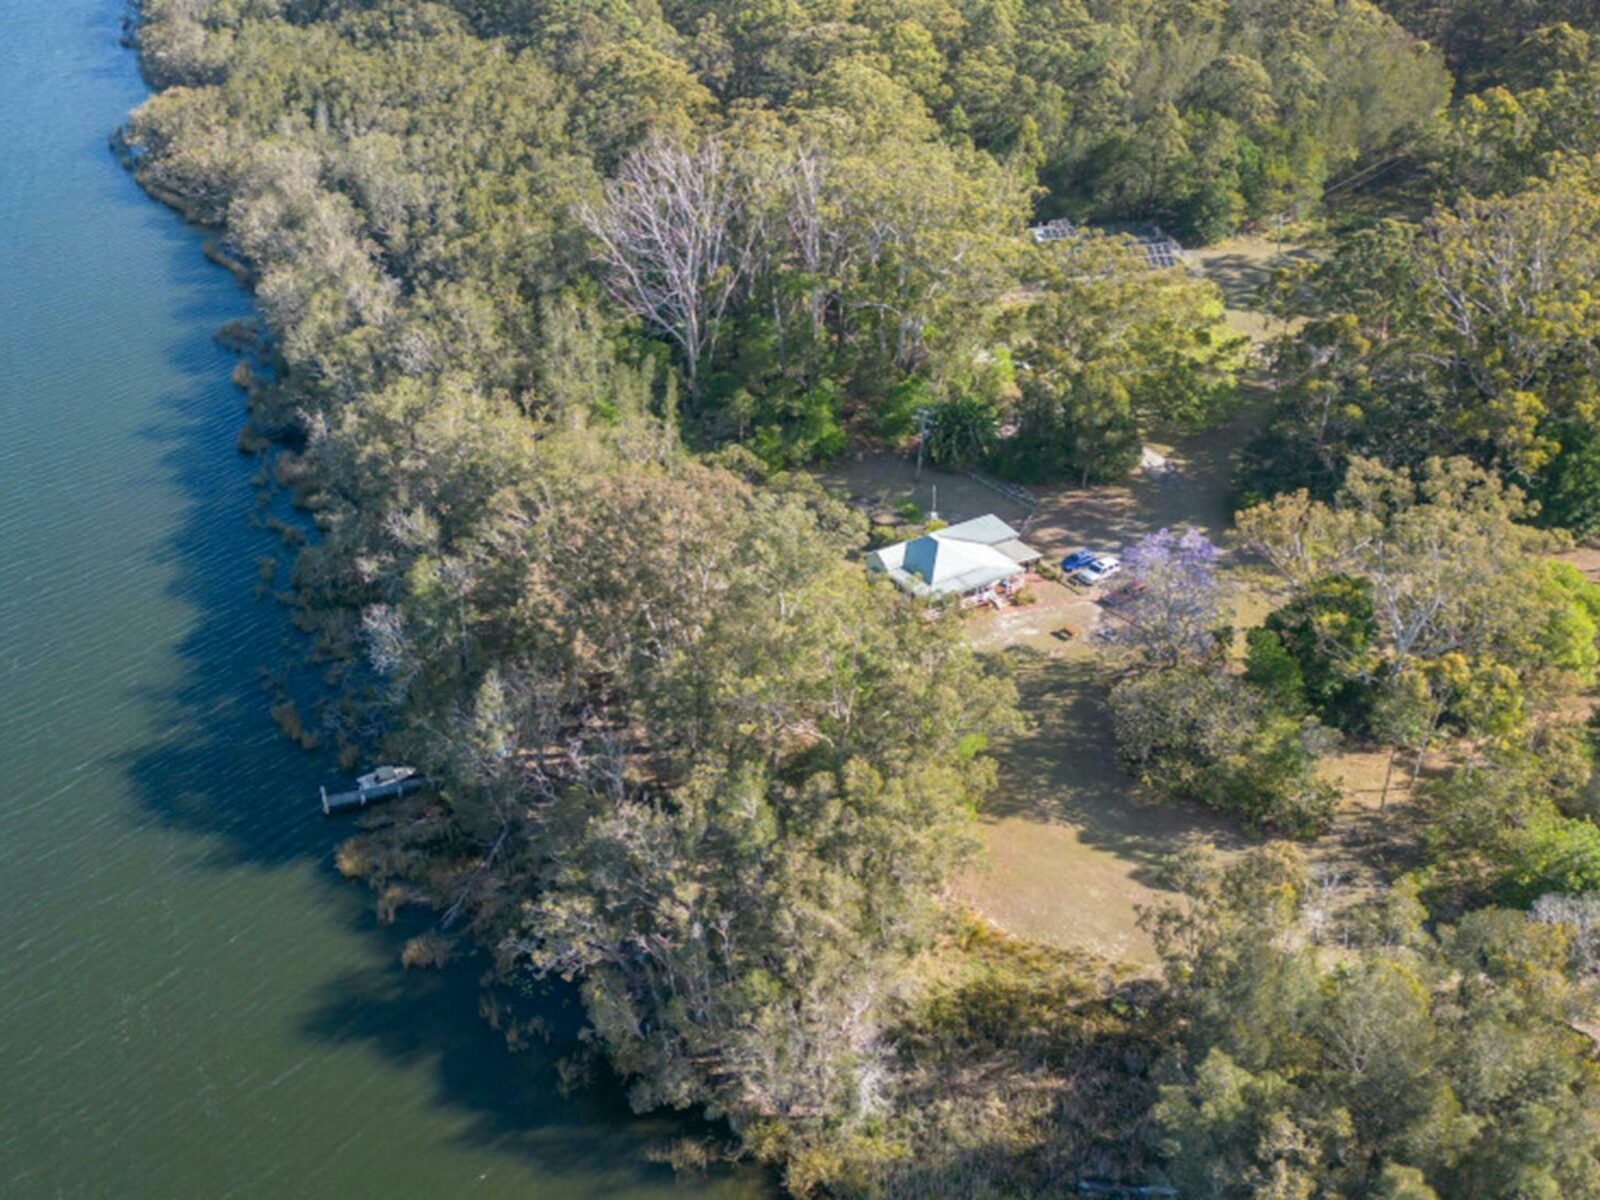 Aerial view of Cutlers Cottage near the lake's edge. Credit: John Spencer © DPE